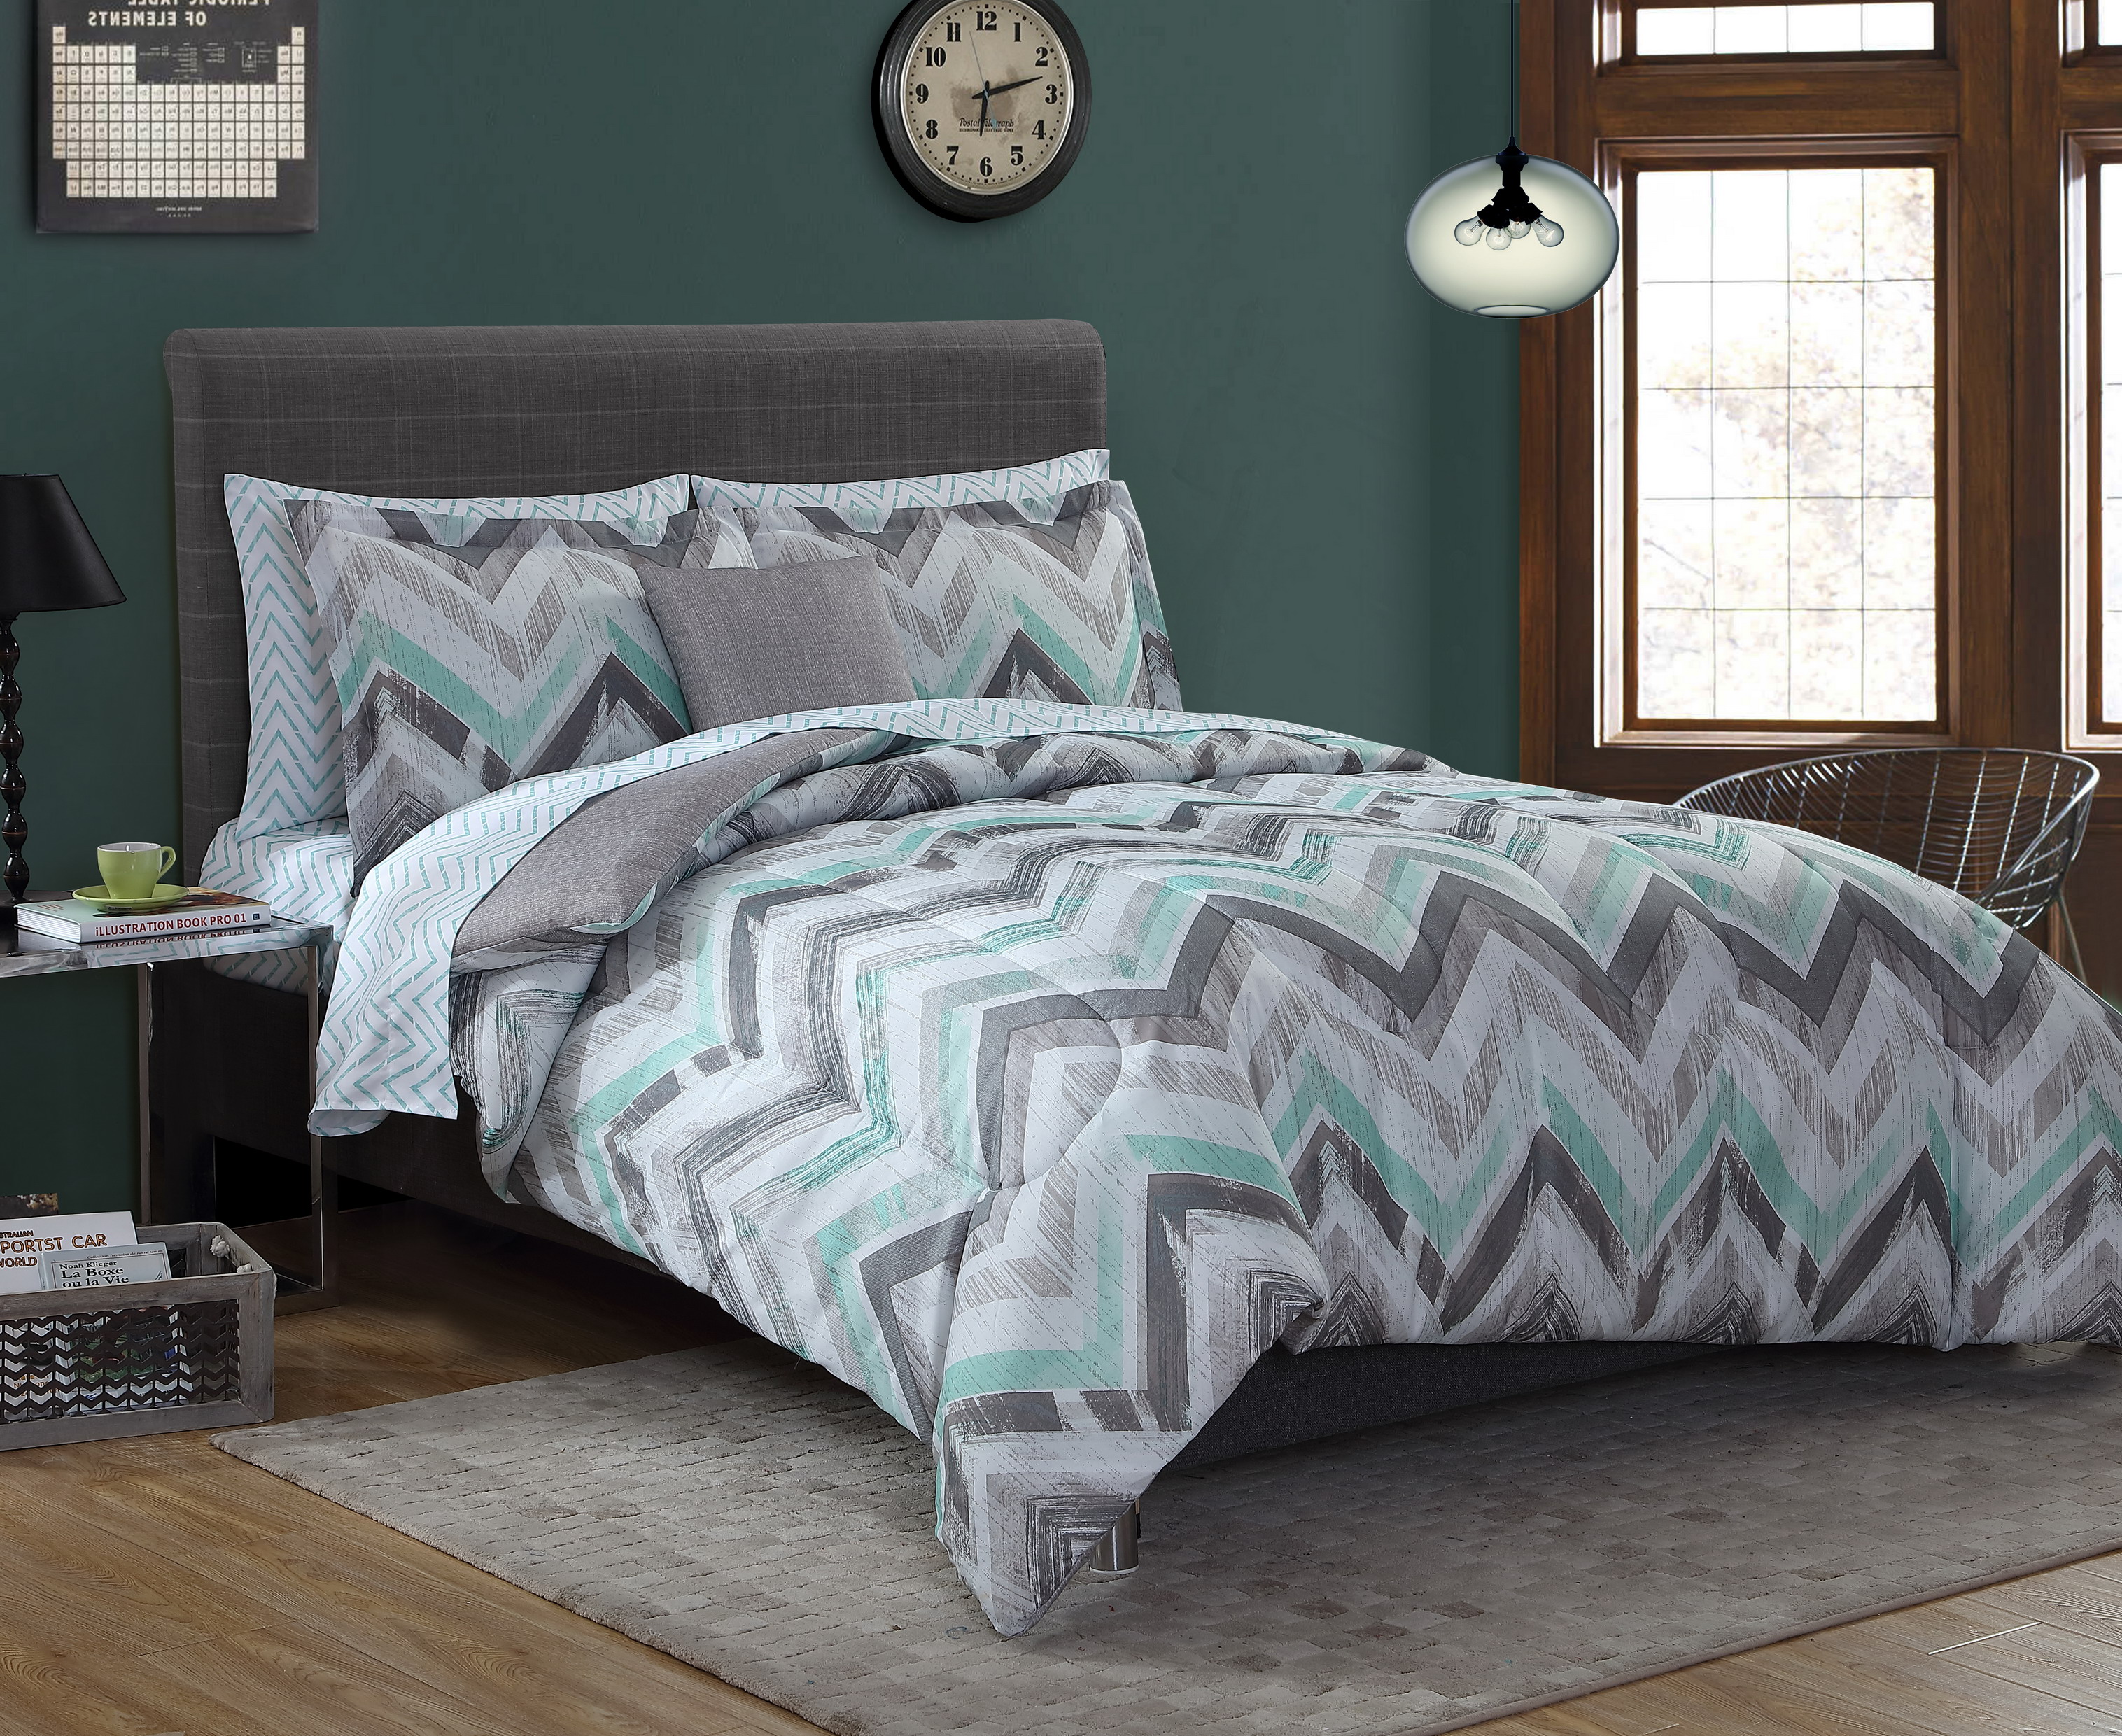 Essential Home Complete Bed Set - Chevron Gray Mint